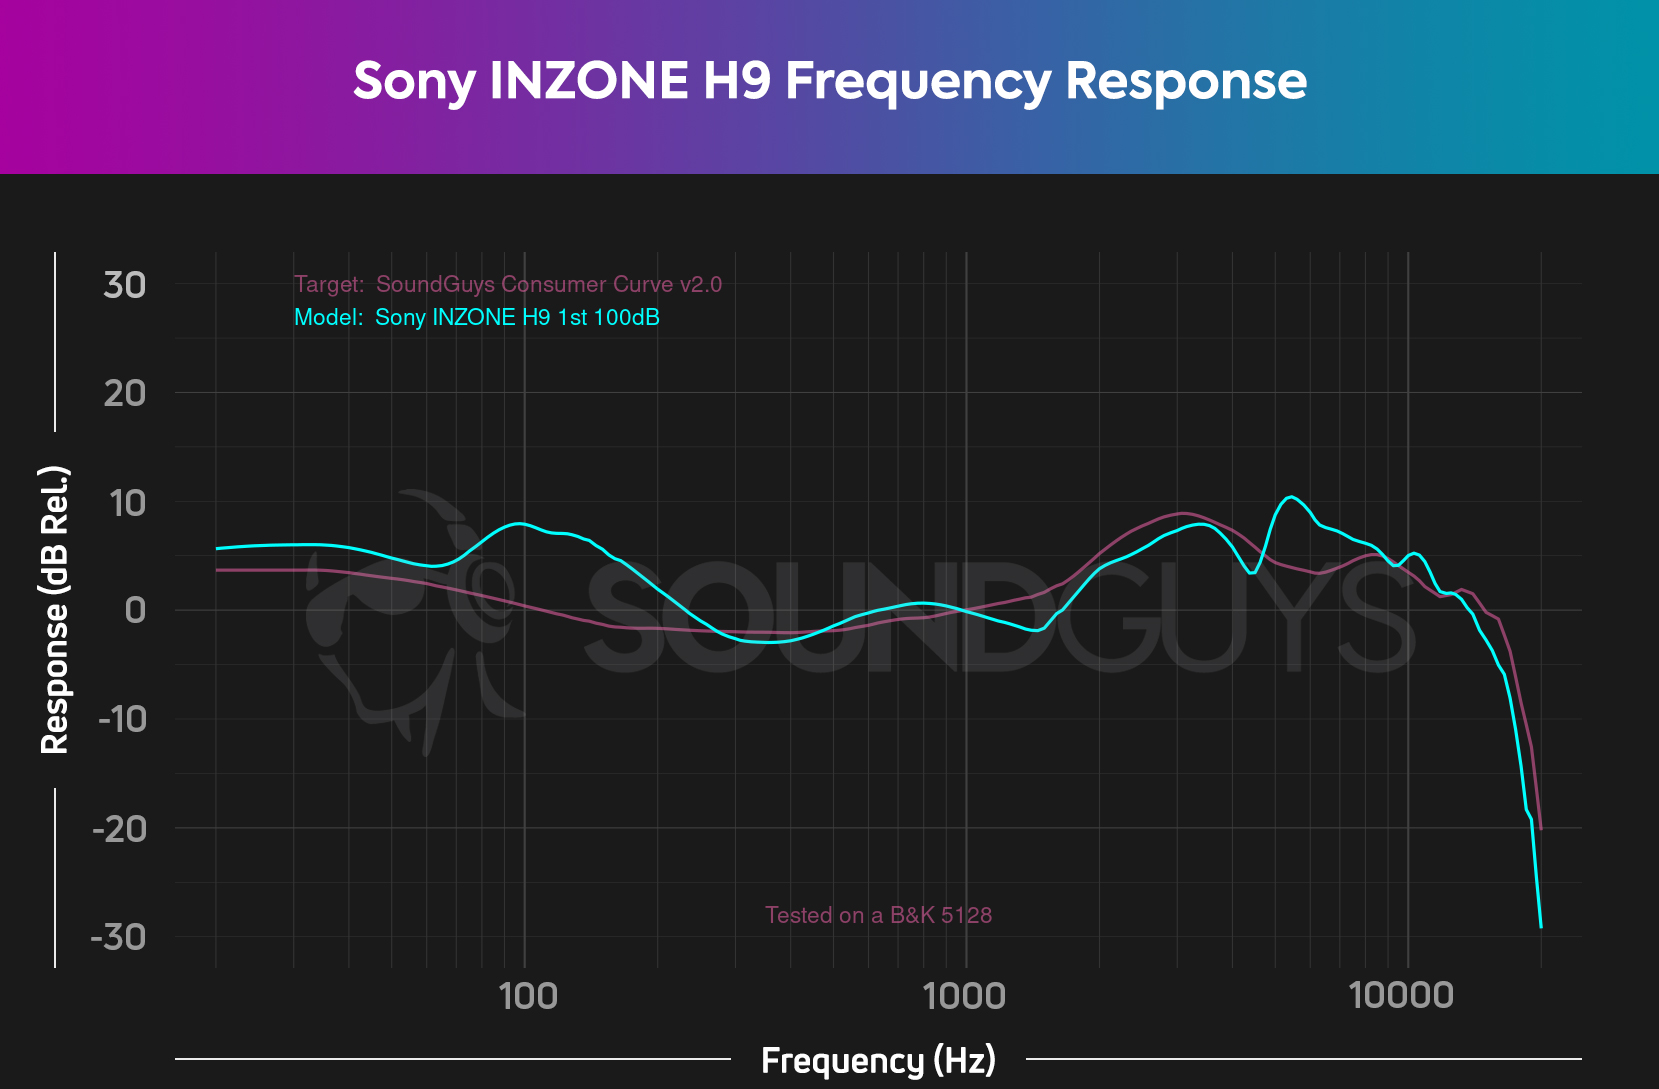 A frequency response chart for the Sony INZONE H9 gaming headset, which shows a lot of added emphasis between 70Hz and 300Hz